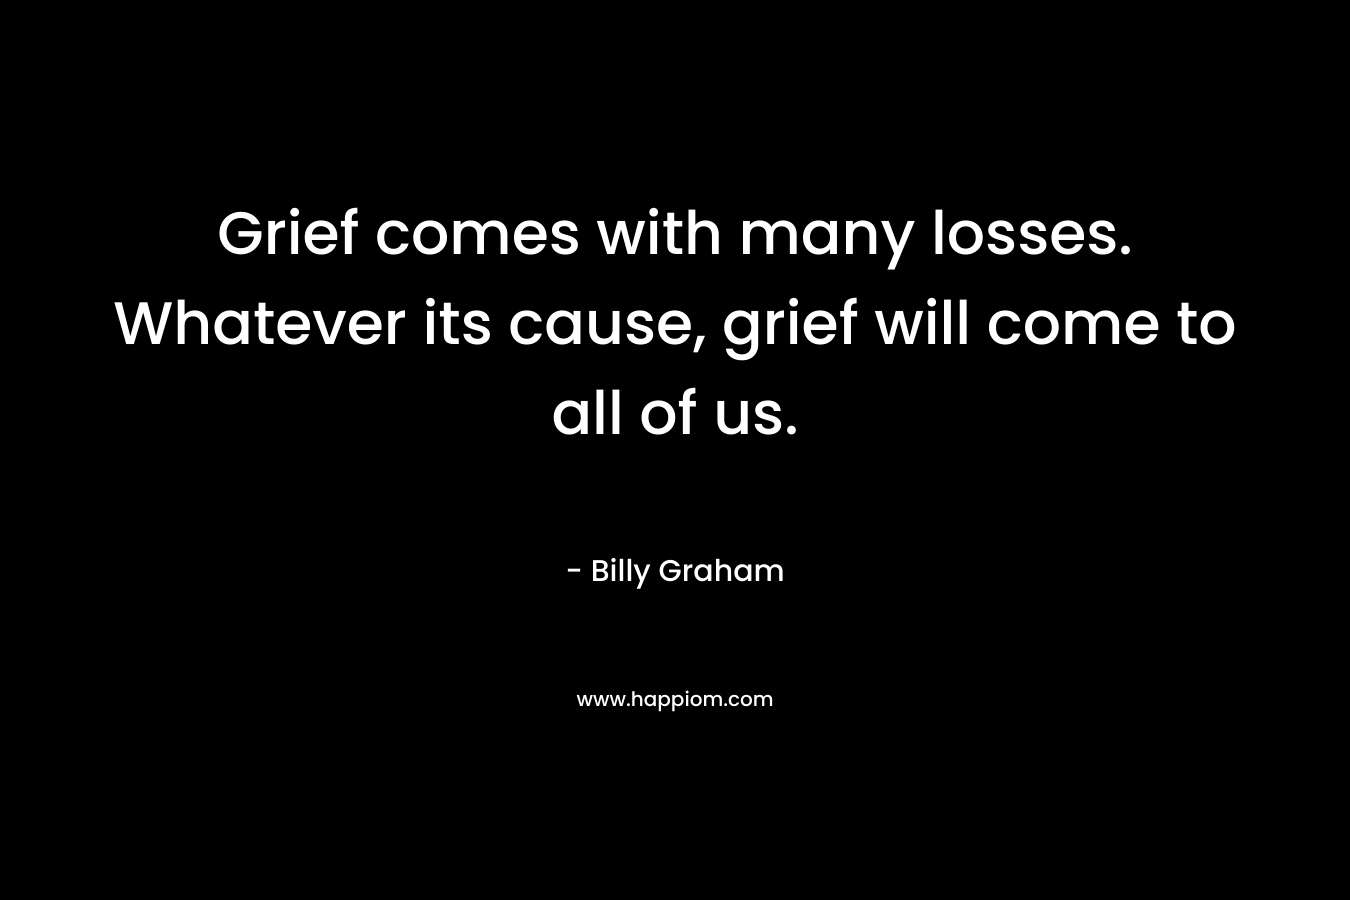 Grief comes with many losses. Whatever its cause, grief will come to all of us.